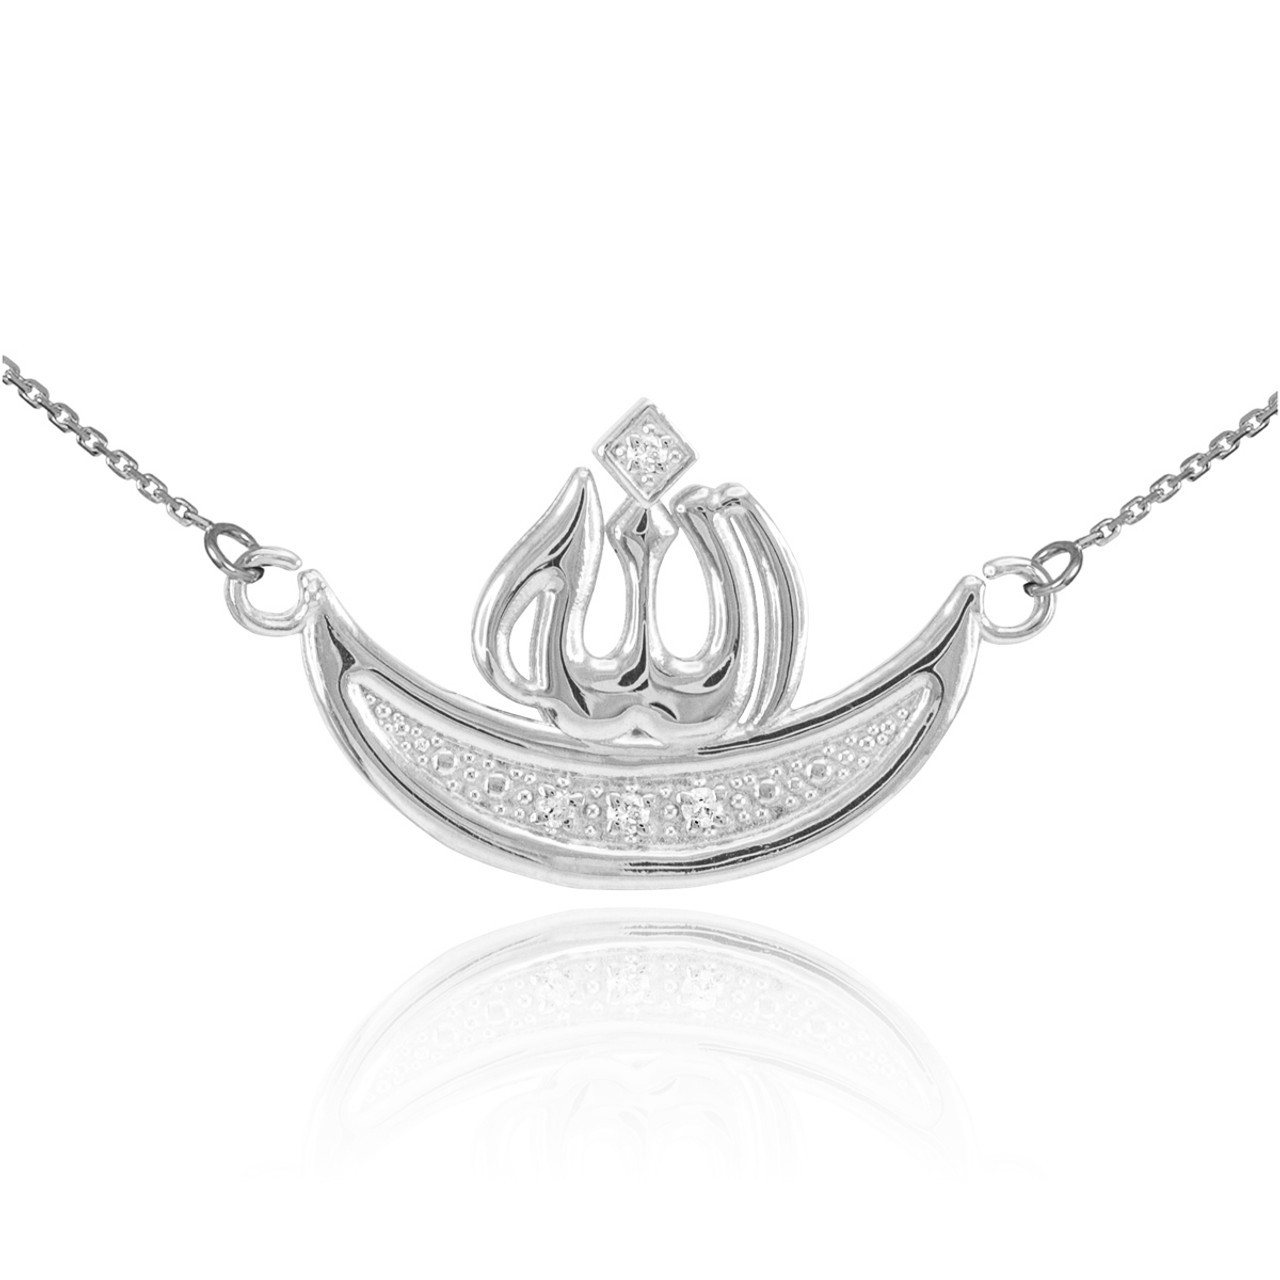 14k White Gold Diamond Crescent Moon and Star Islamic Necklace